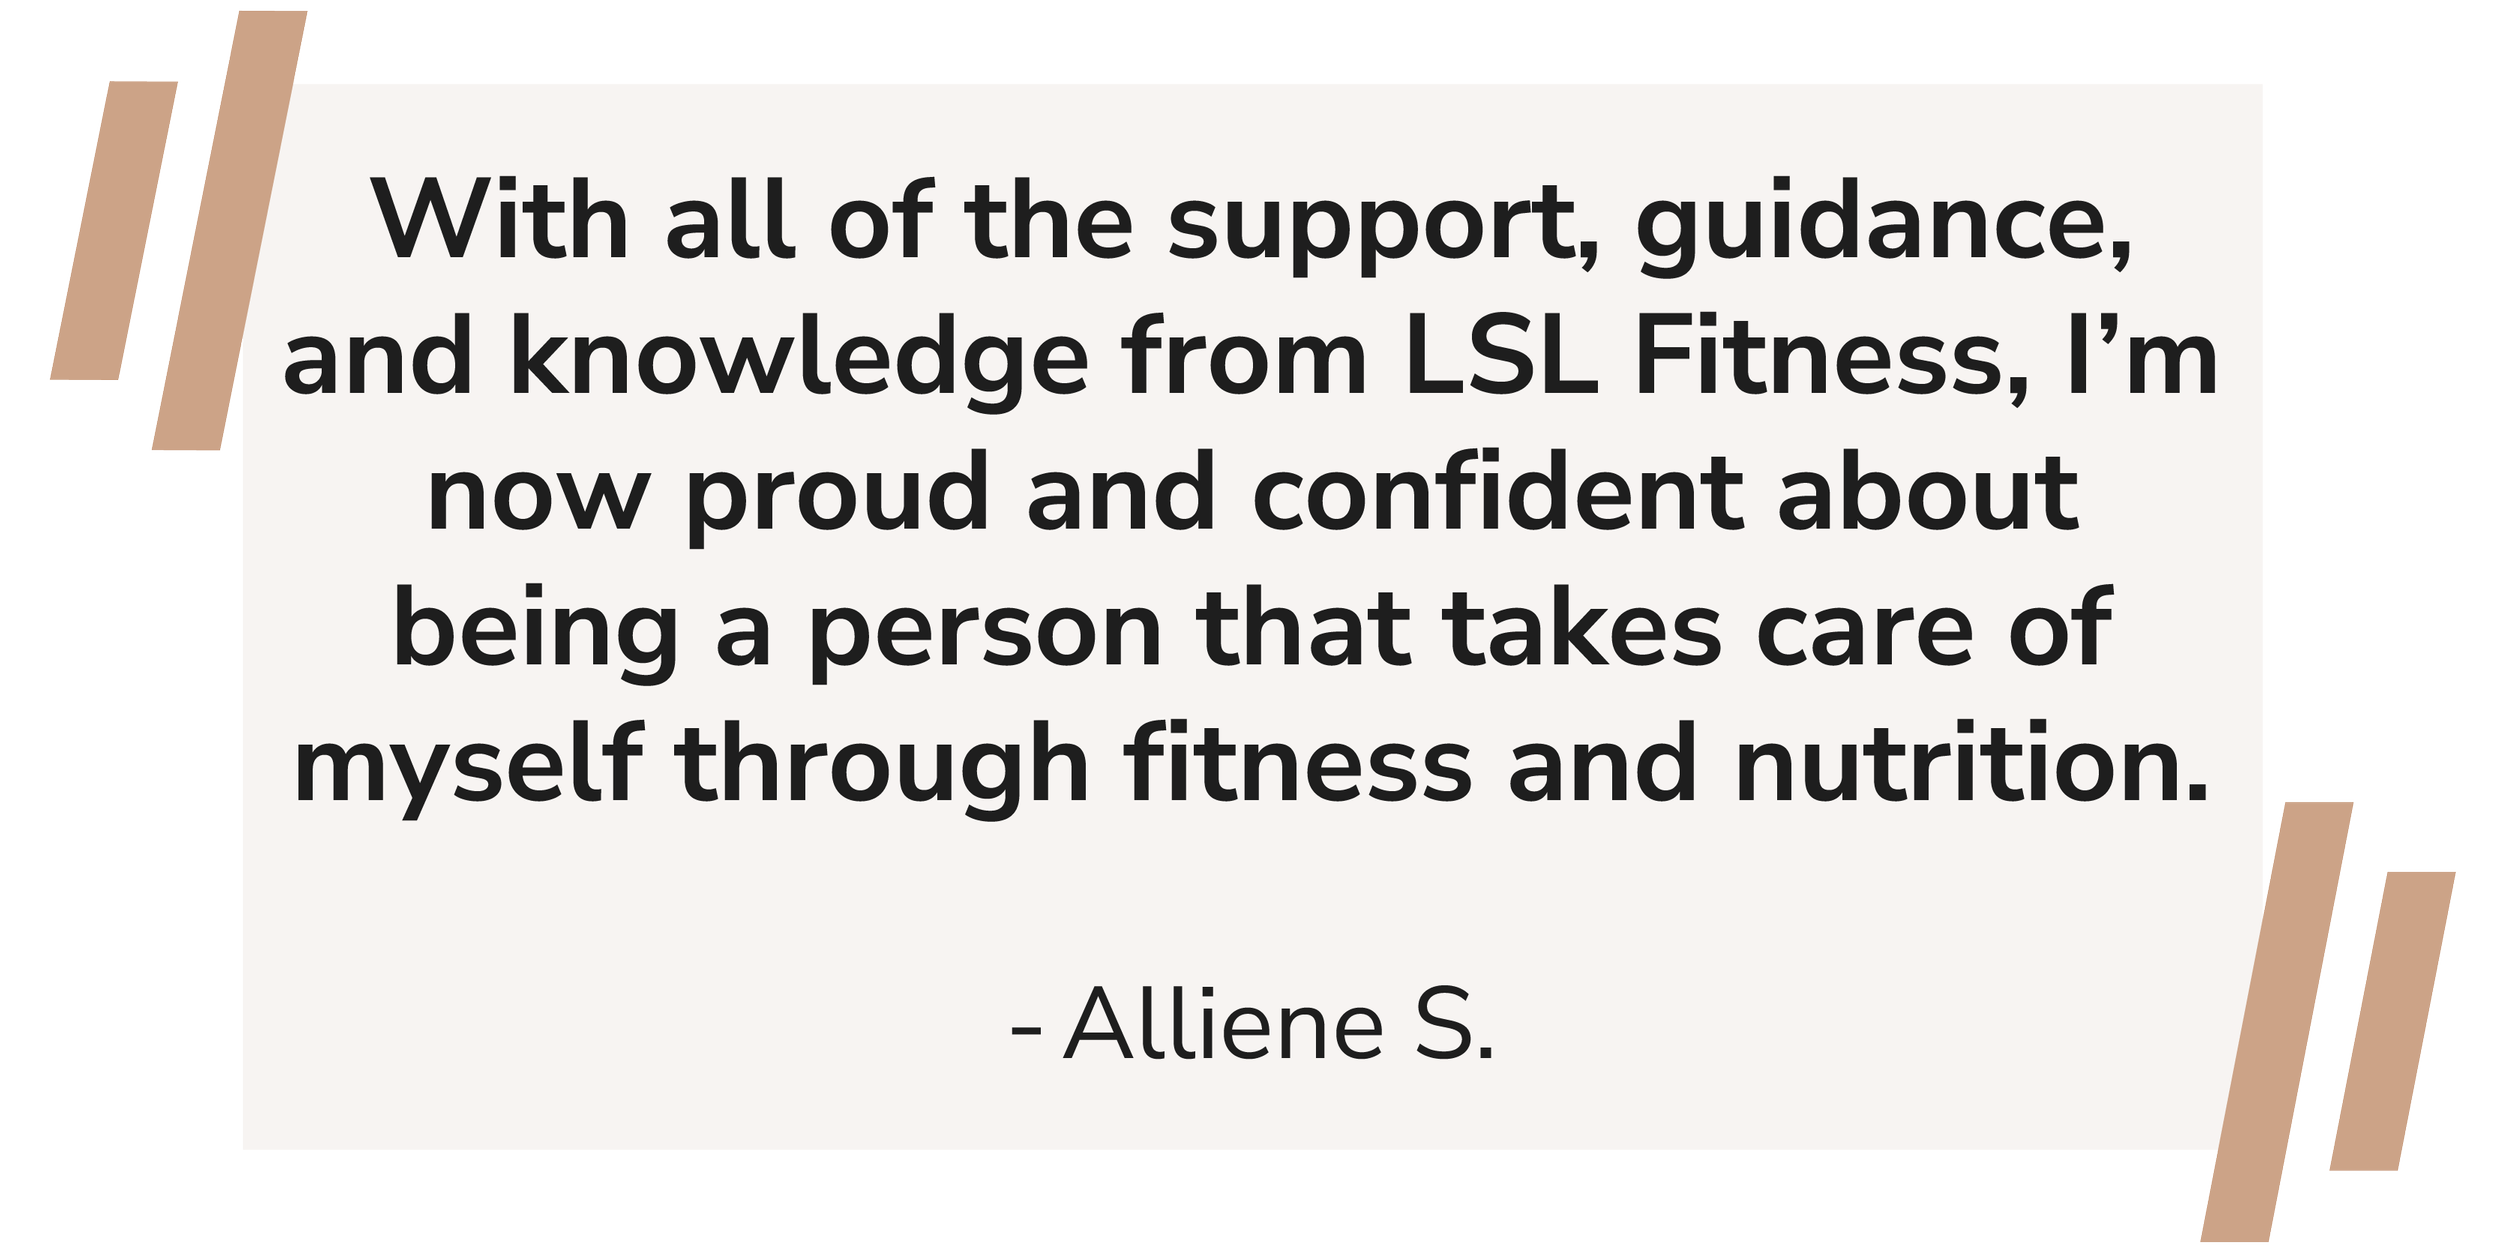 LSL Fitness Client Quotes.png